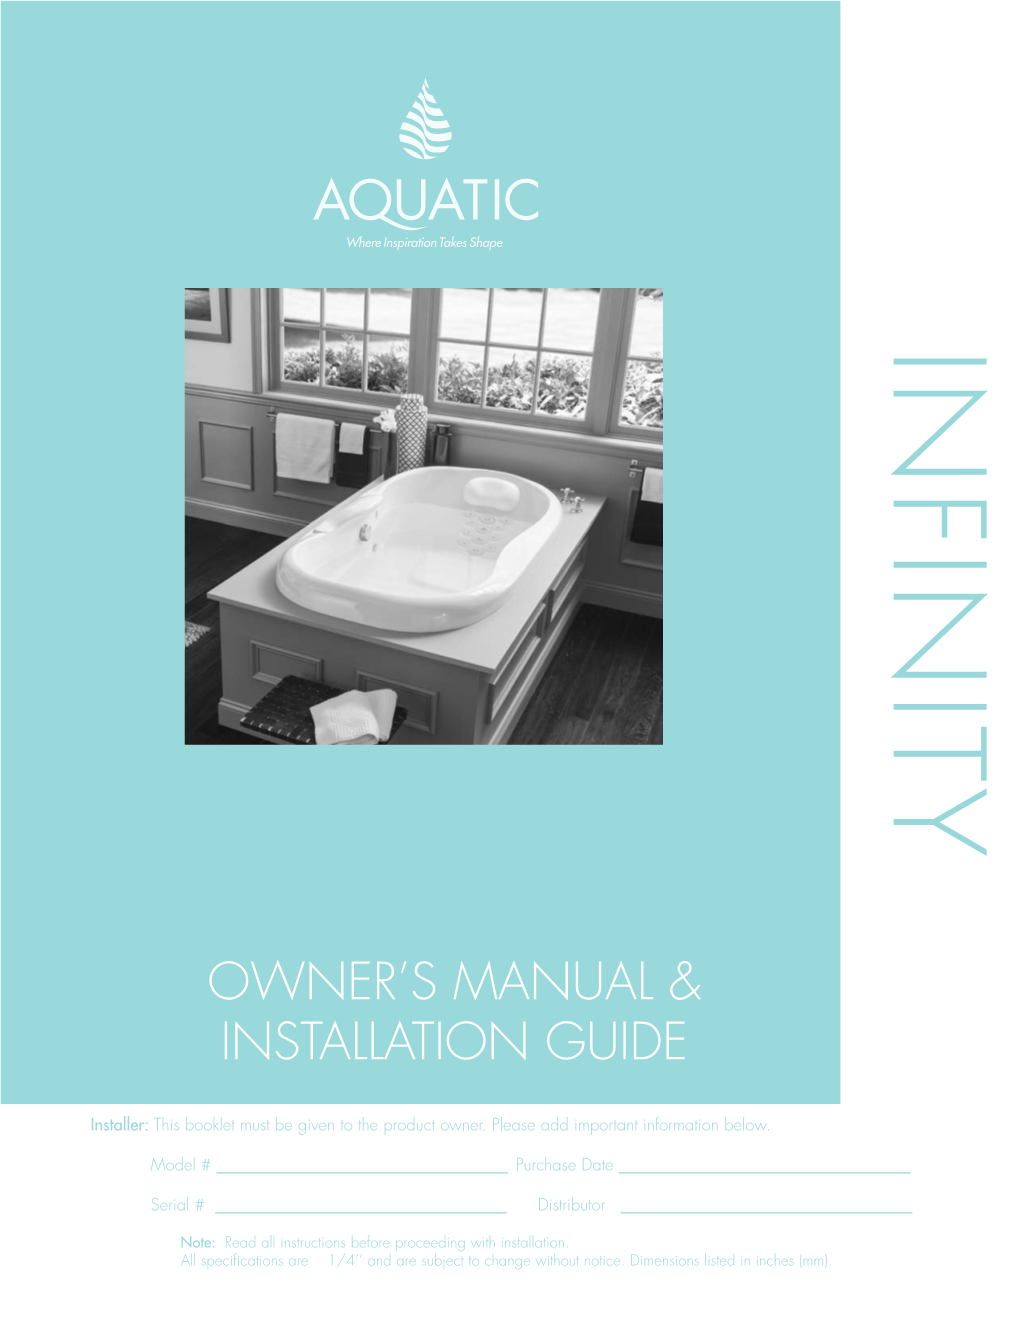 Owner's Manual & Installation Guide